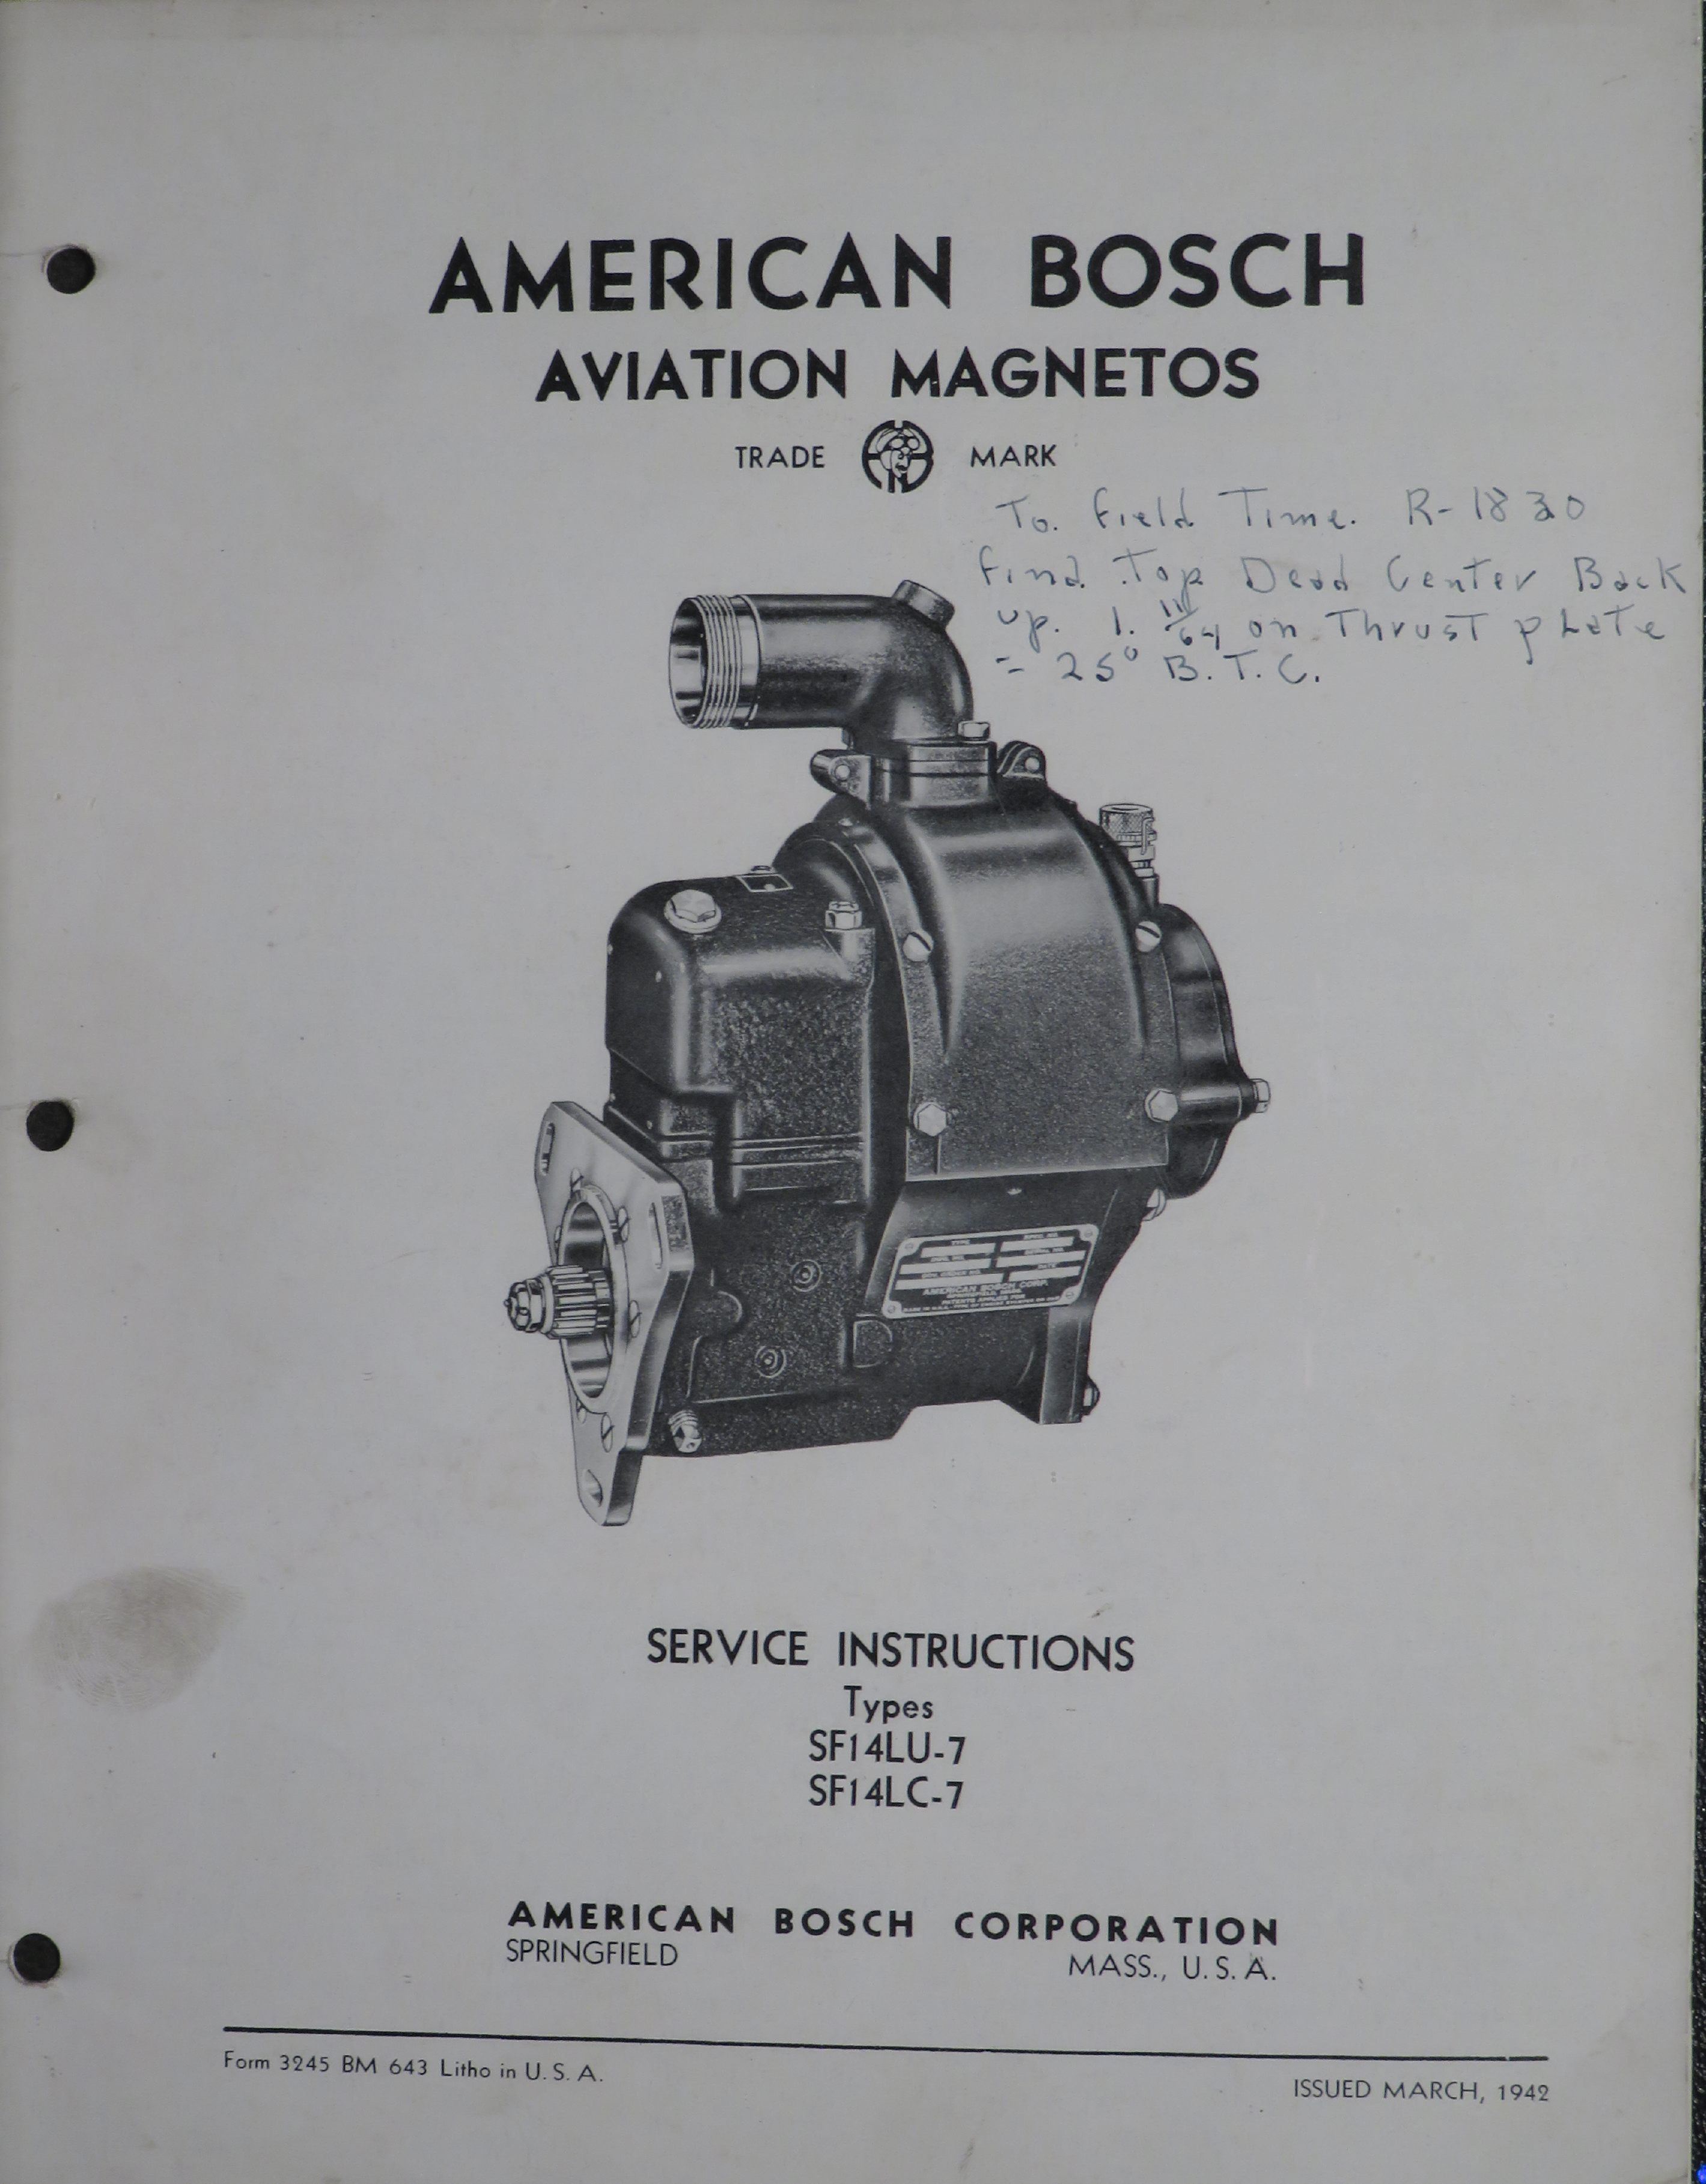 Sample page 1 from AirCorps Library document: Service Instructions for American Bosch Aviation Magnetos - Types SF14LU-7 and SF14LC-7